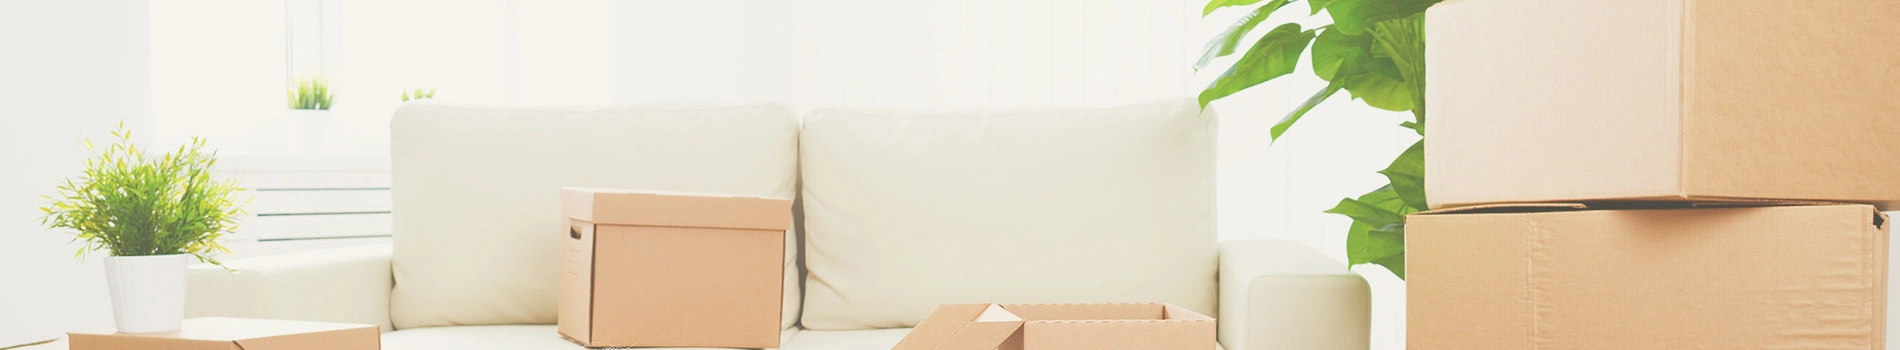 Packers and Movers Gorakhpur